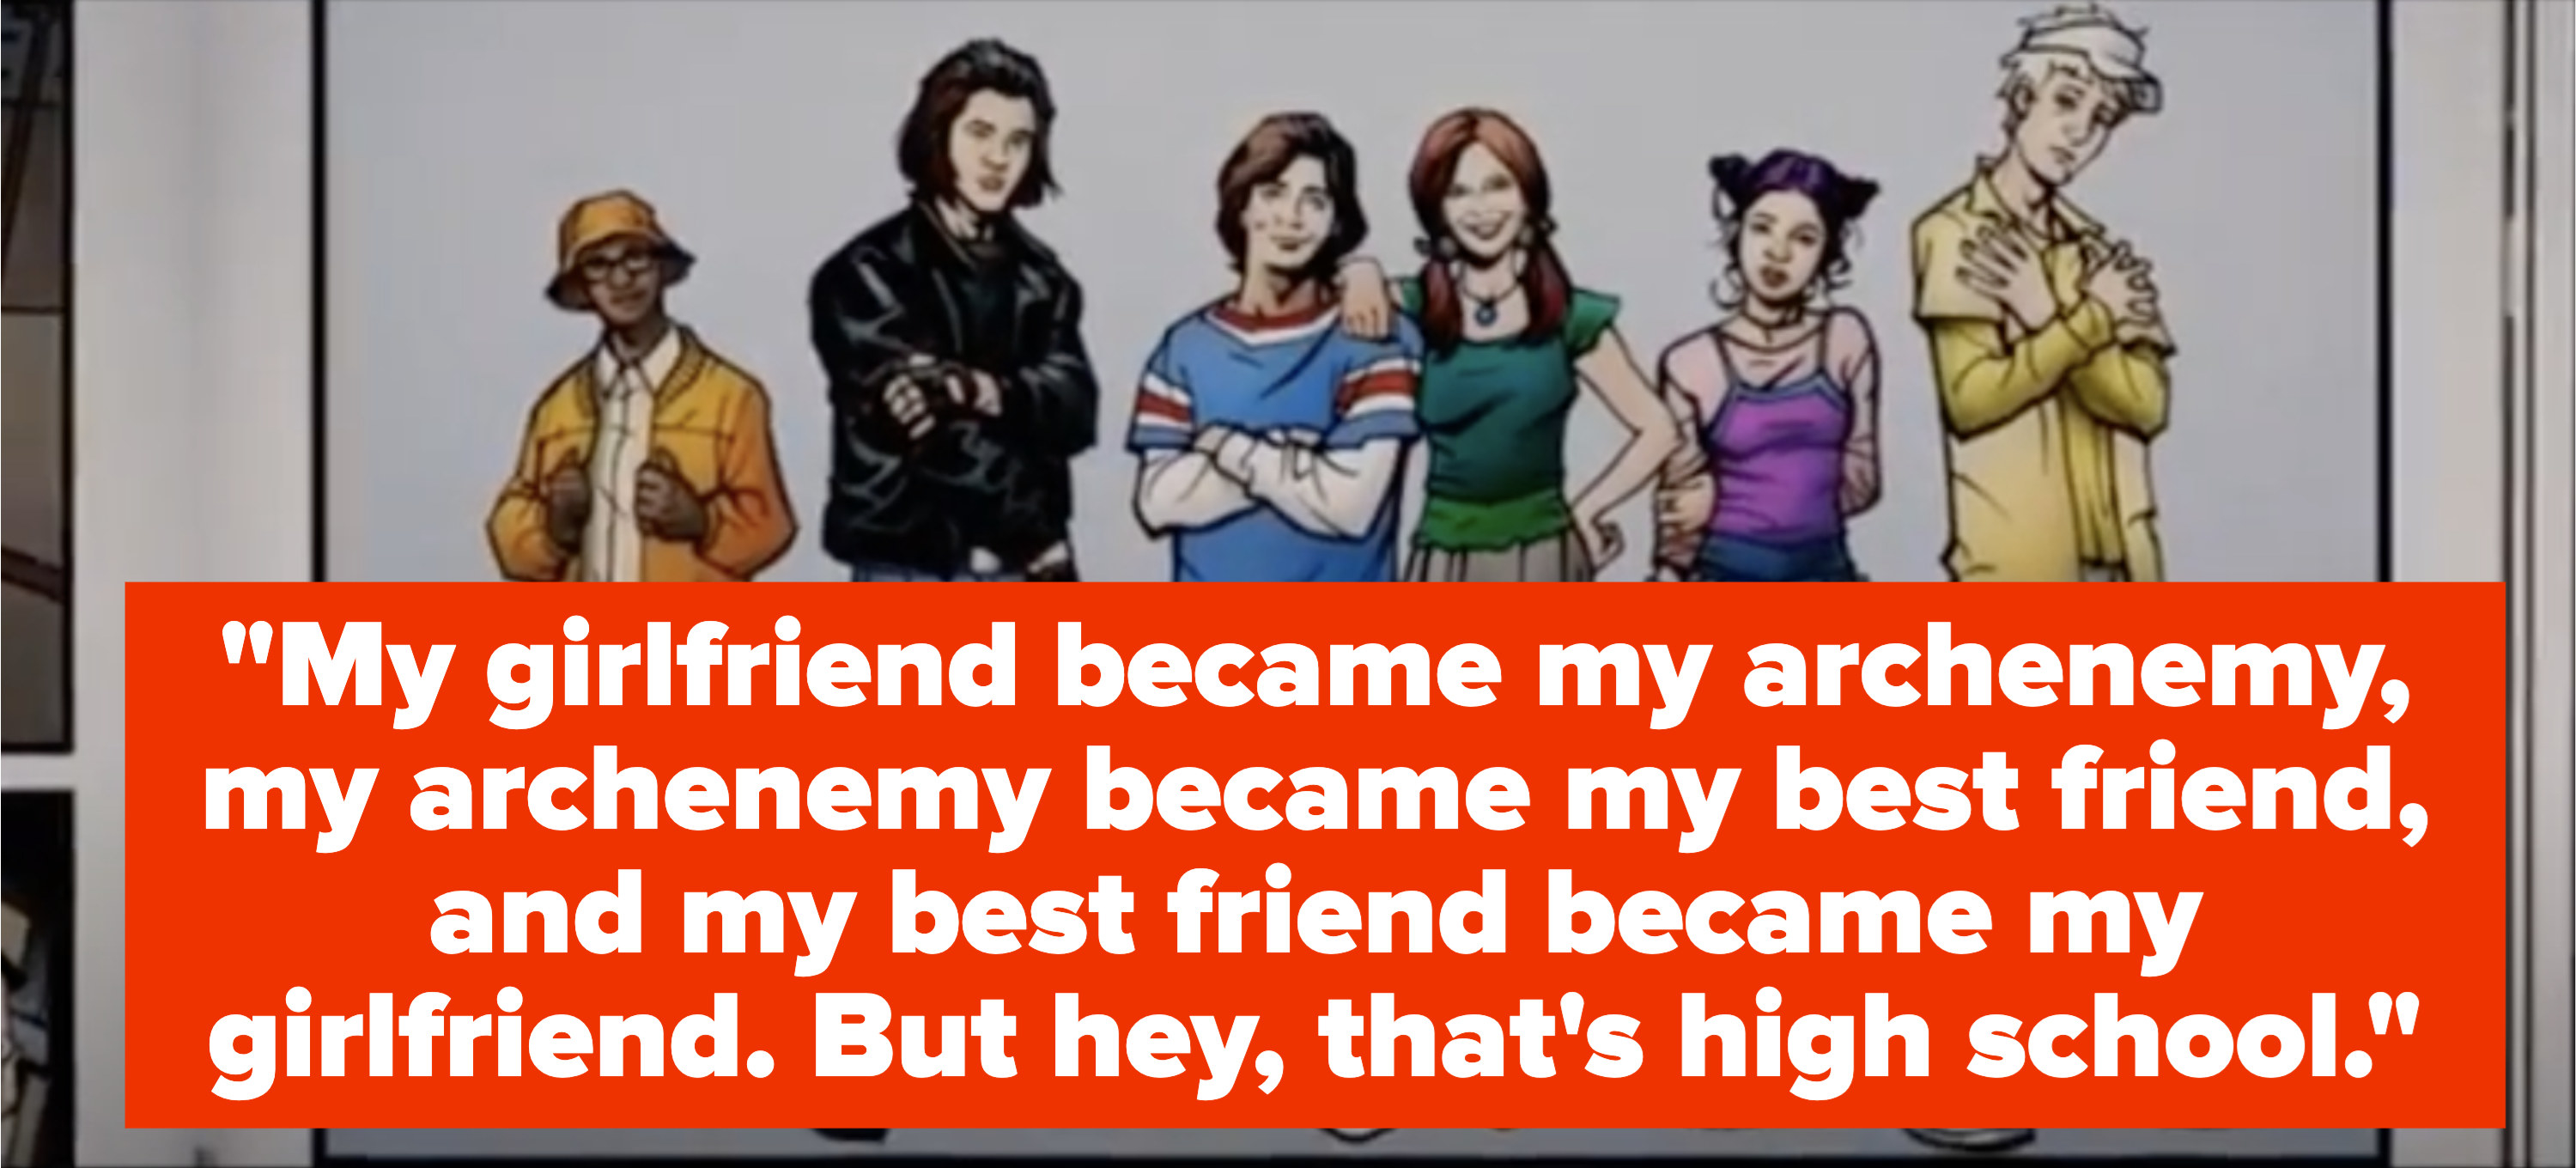 &quot;My girlfriend became my archenemy, my archenemy became my best friend, and my best friend became my girlfriend. But hey, that&#x27;s high school&quot;